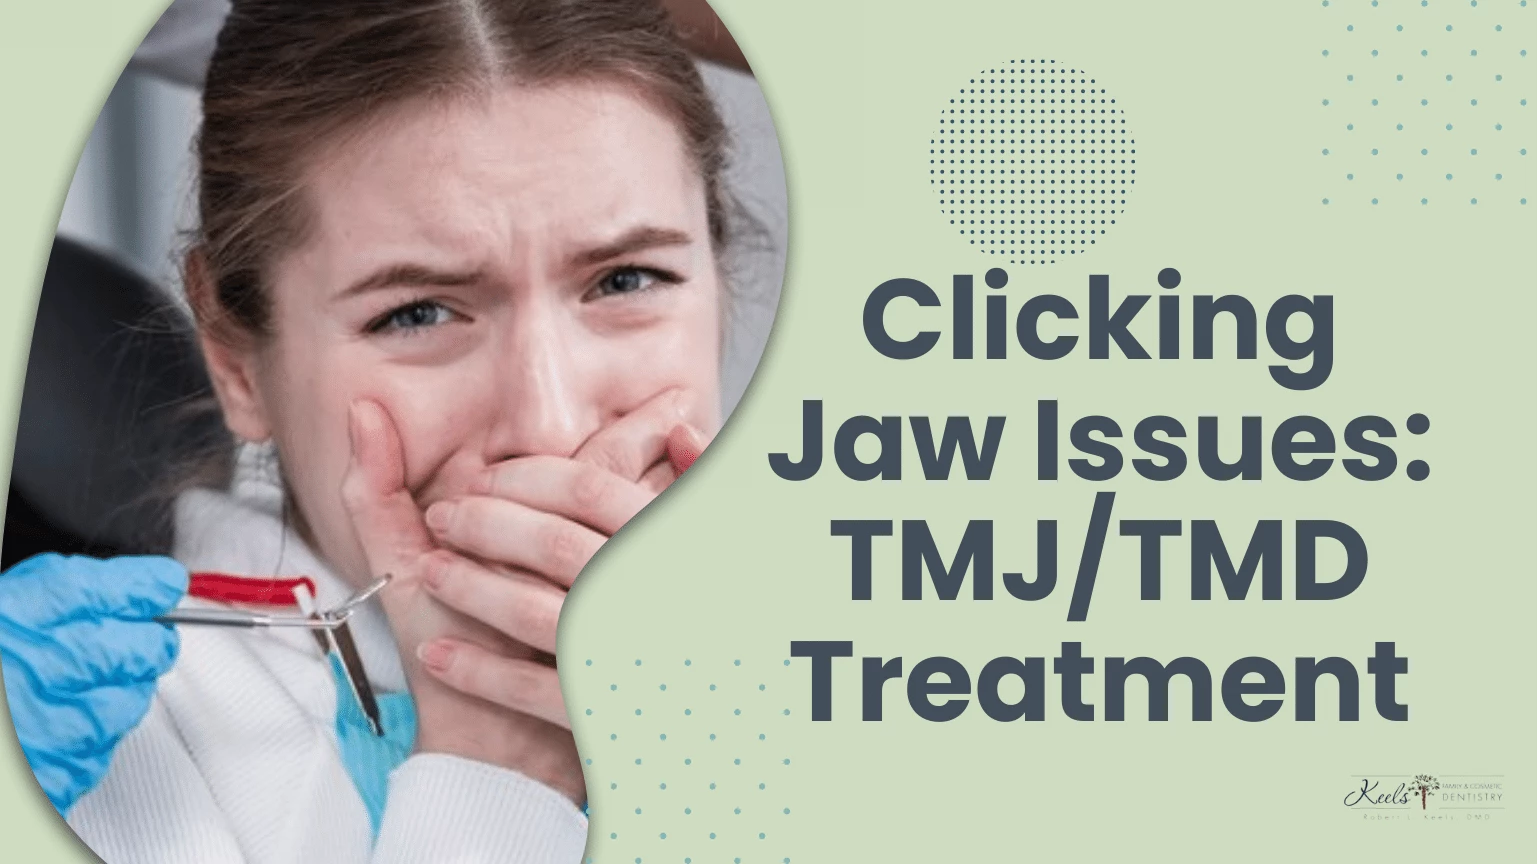 Clicking Jaw Issues TMJTMD Treatment